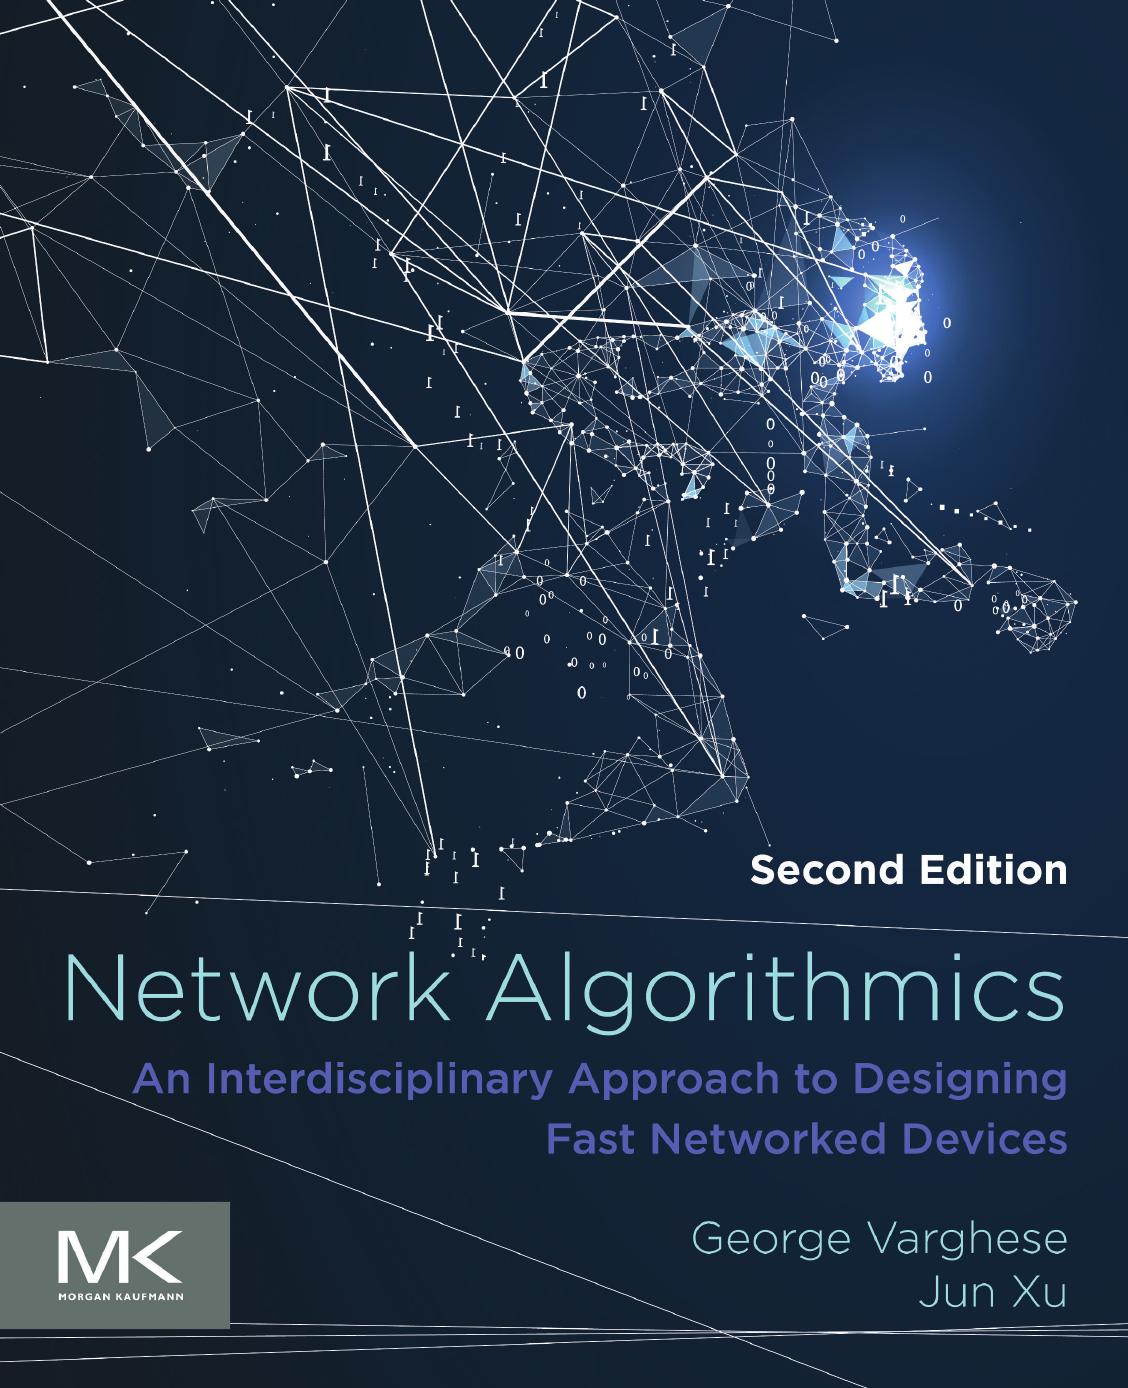 Network Algorithmics: An Interdisciplinary Approach to Designing Fast Networked Devices by George Varghese & Jun Xu